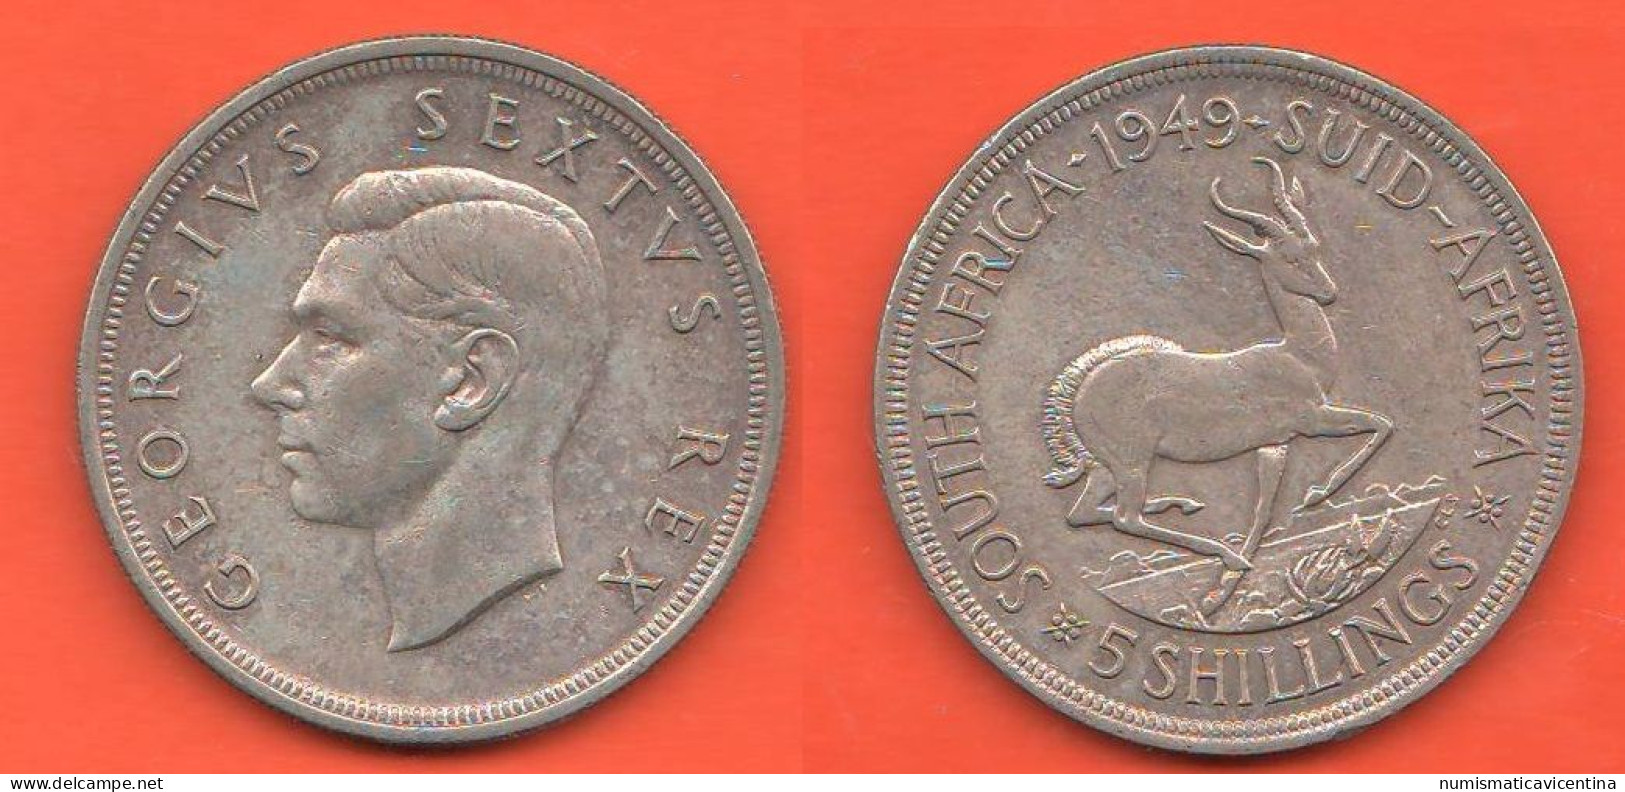 South Africa 5 Shillings 1949 Sud Africa Suid Afrika Silver Coin  King Georgius VI° - South Africa